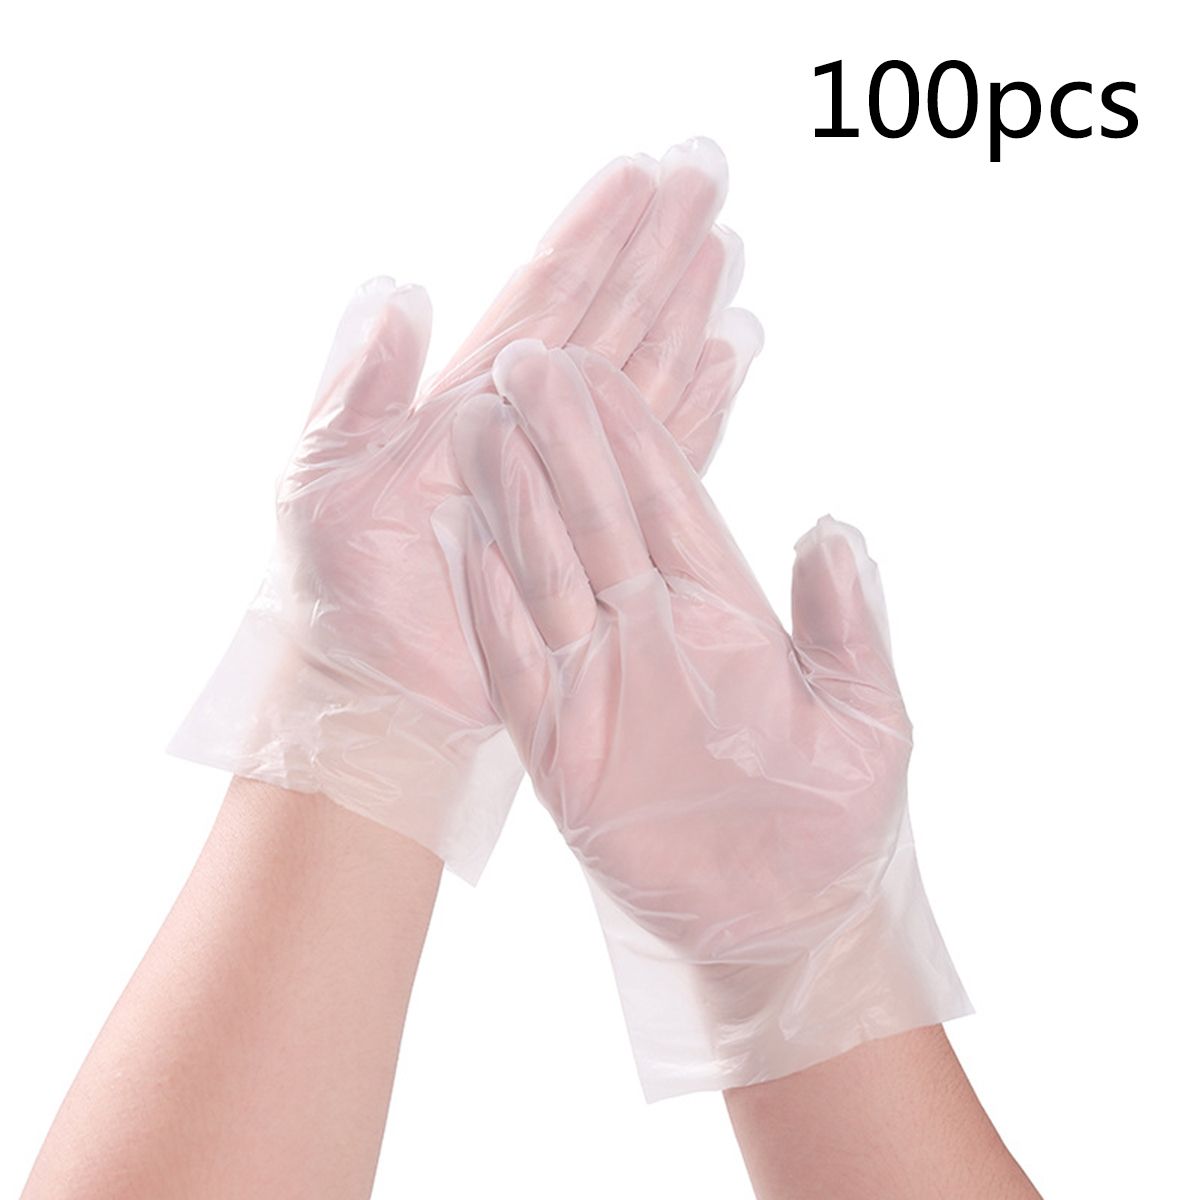 100pcs Disposable TPE Household Gloves for Dishwashing and Cleaning